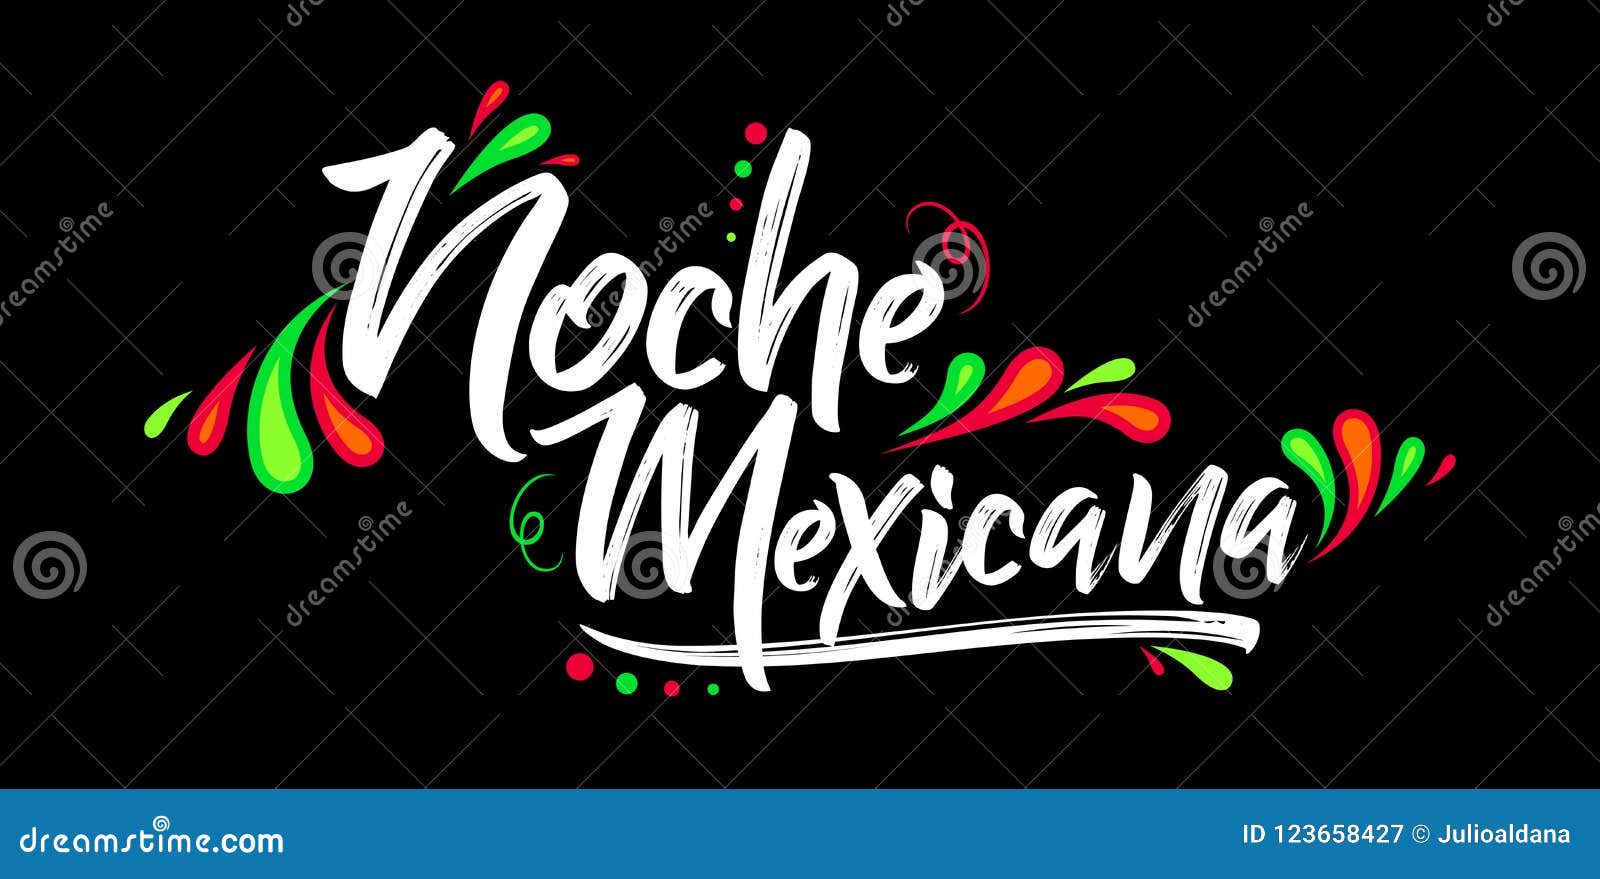 noche mexicana, mexican night spanish text, banner  celebration